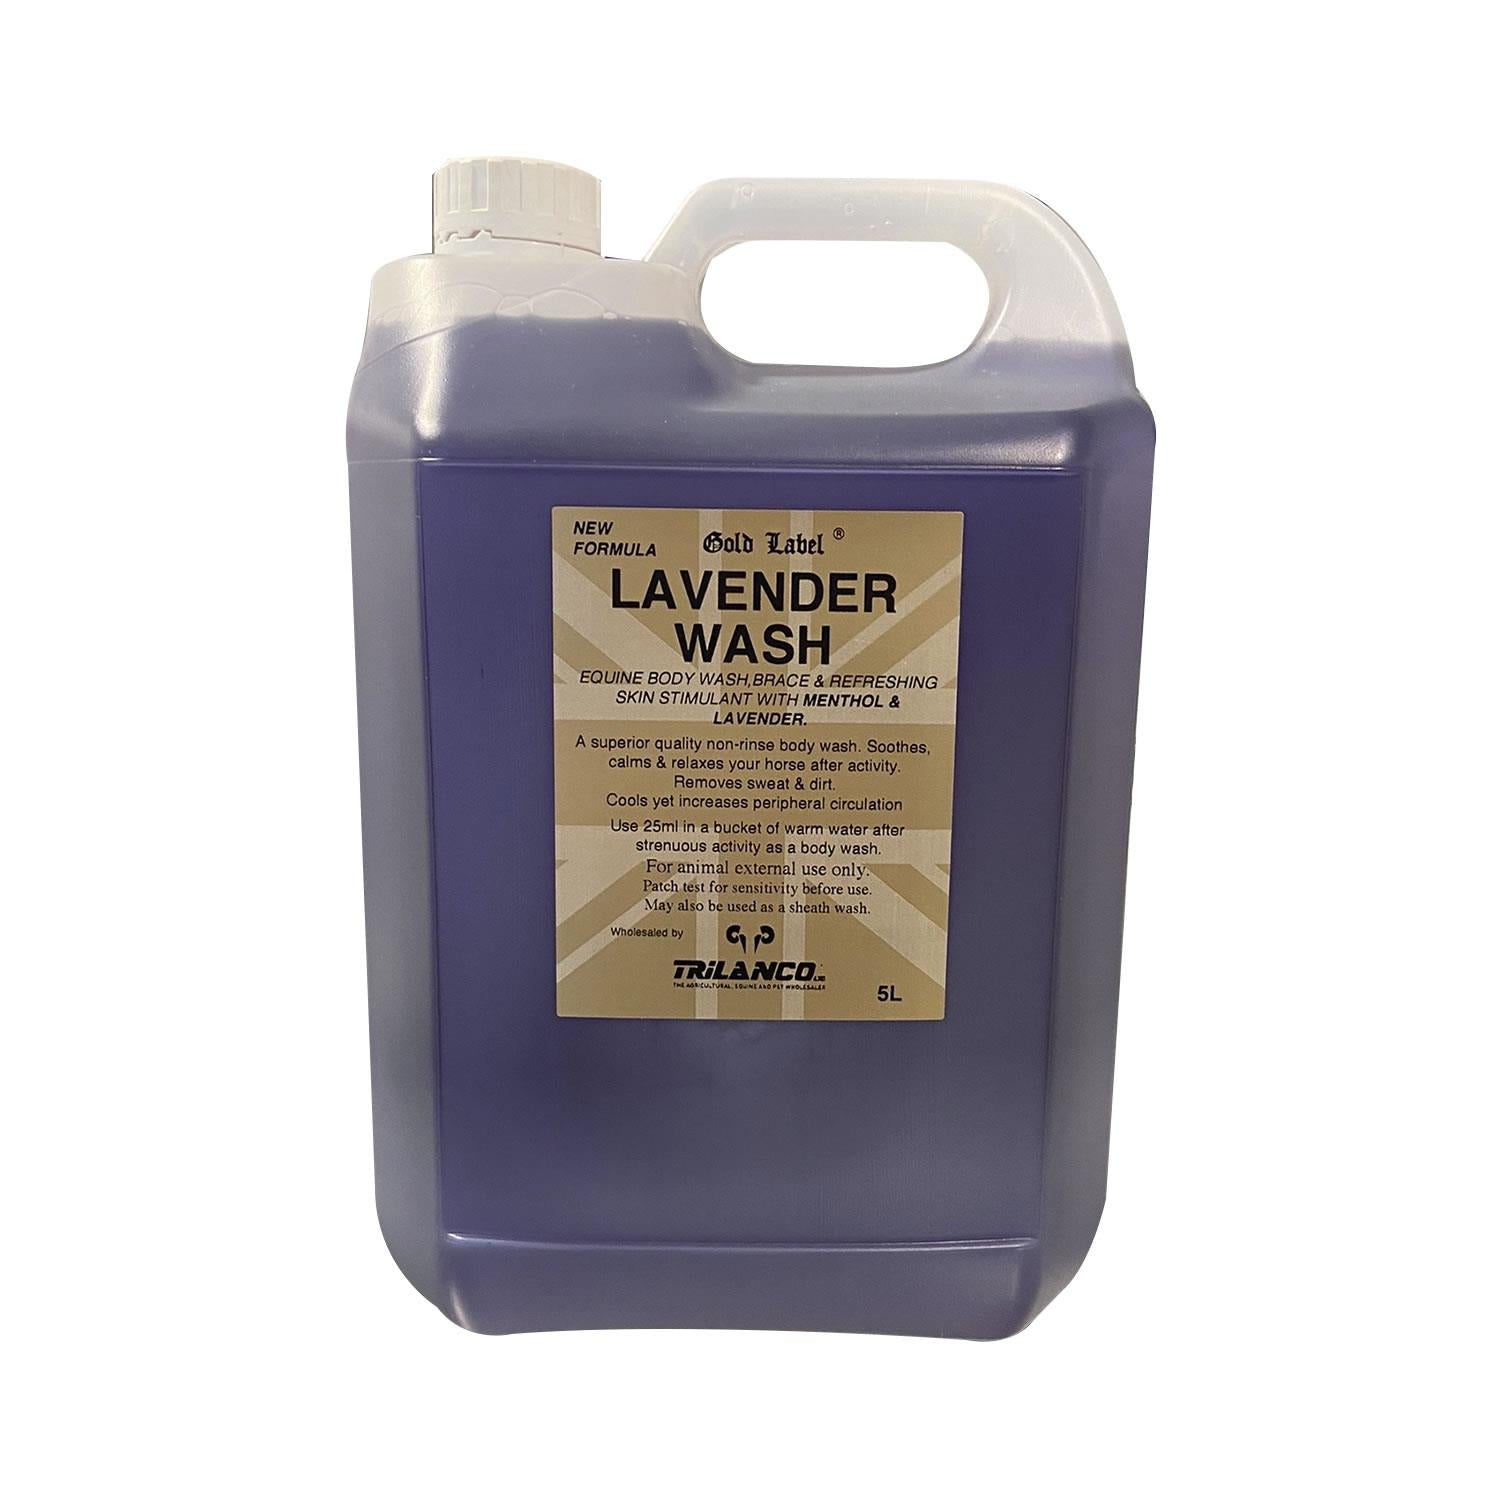 Gold Label Lavender Wash - Just Horse Riders